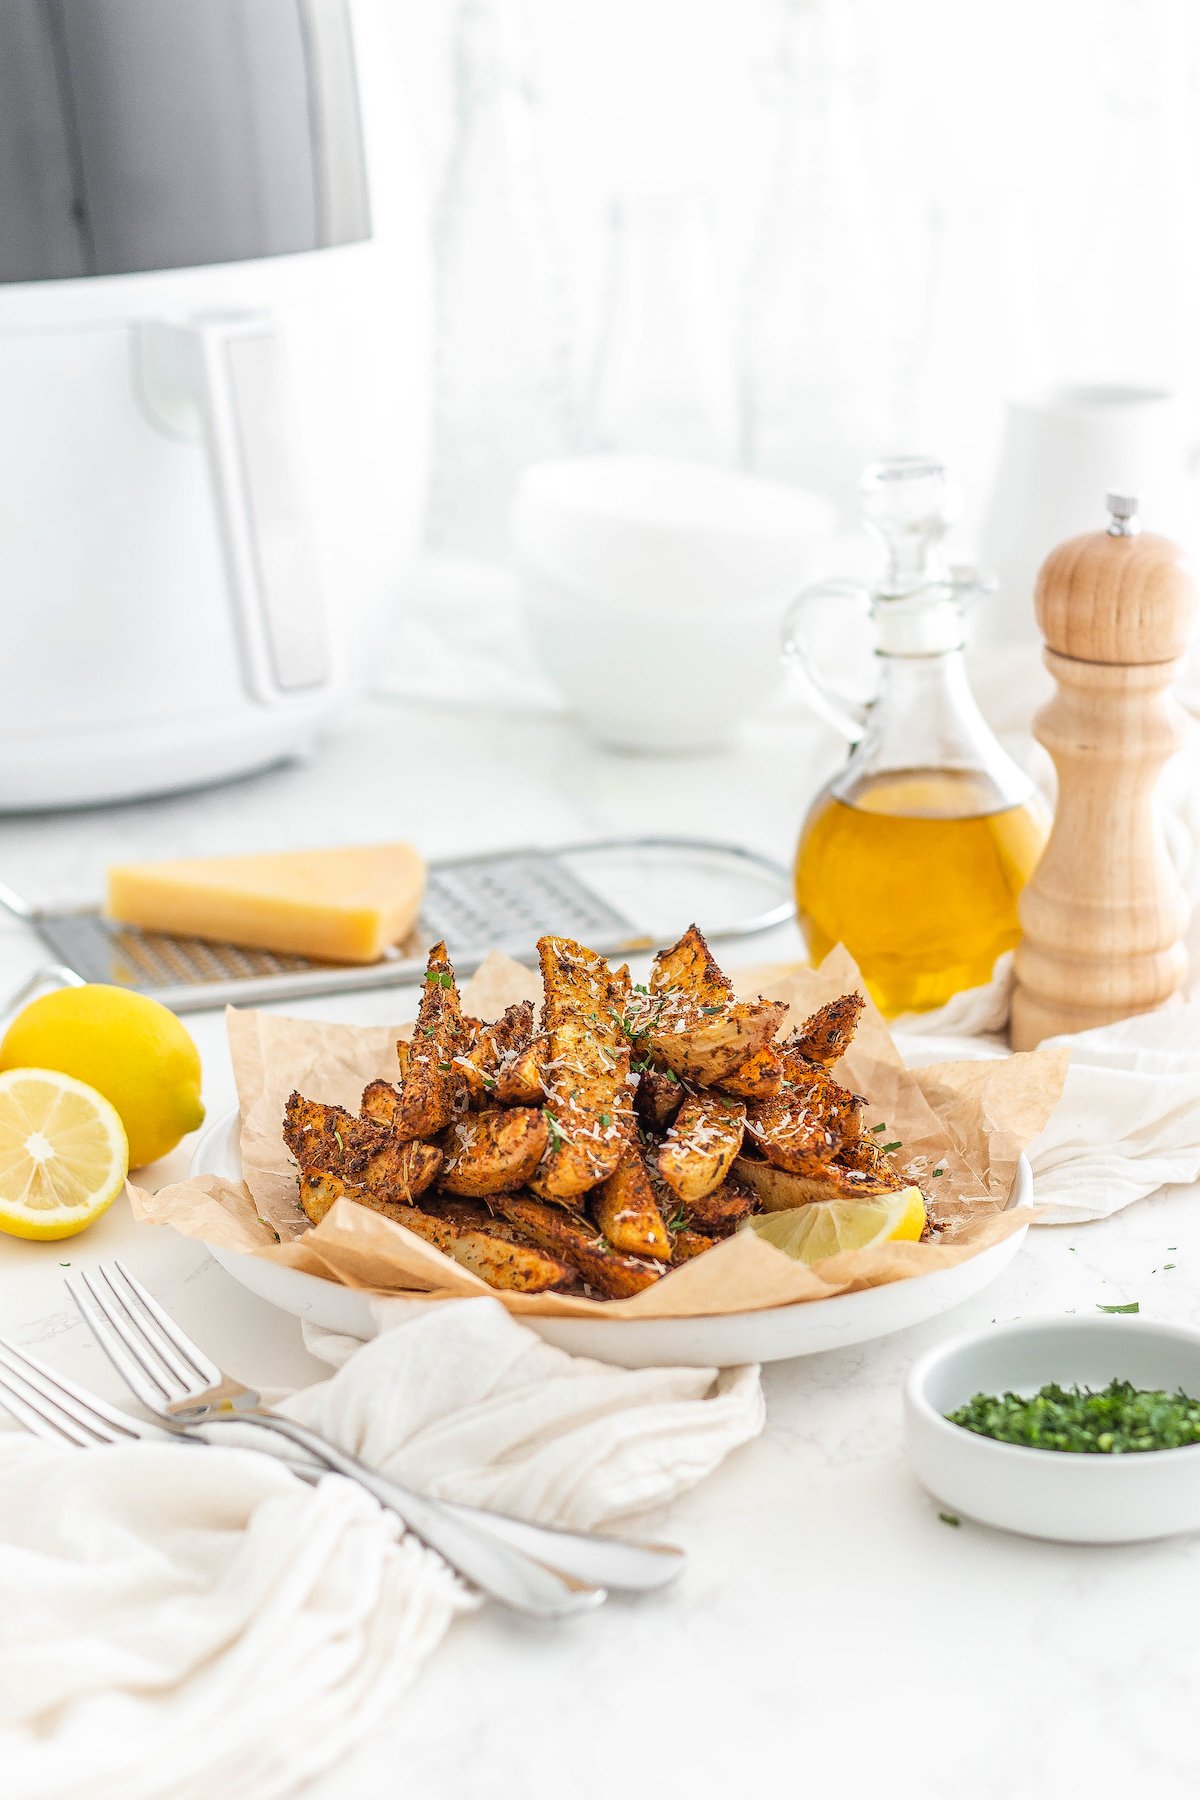 A table with a plate of seasoned potato wedges, an air fryer, a cloth napkin, and other items.